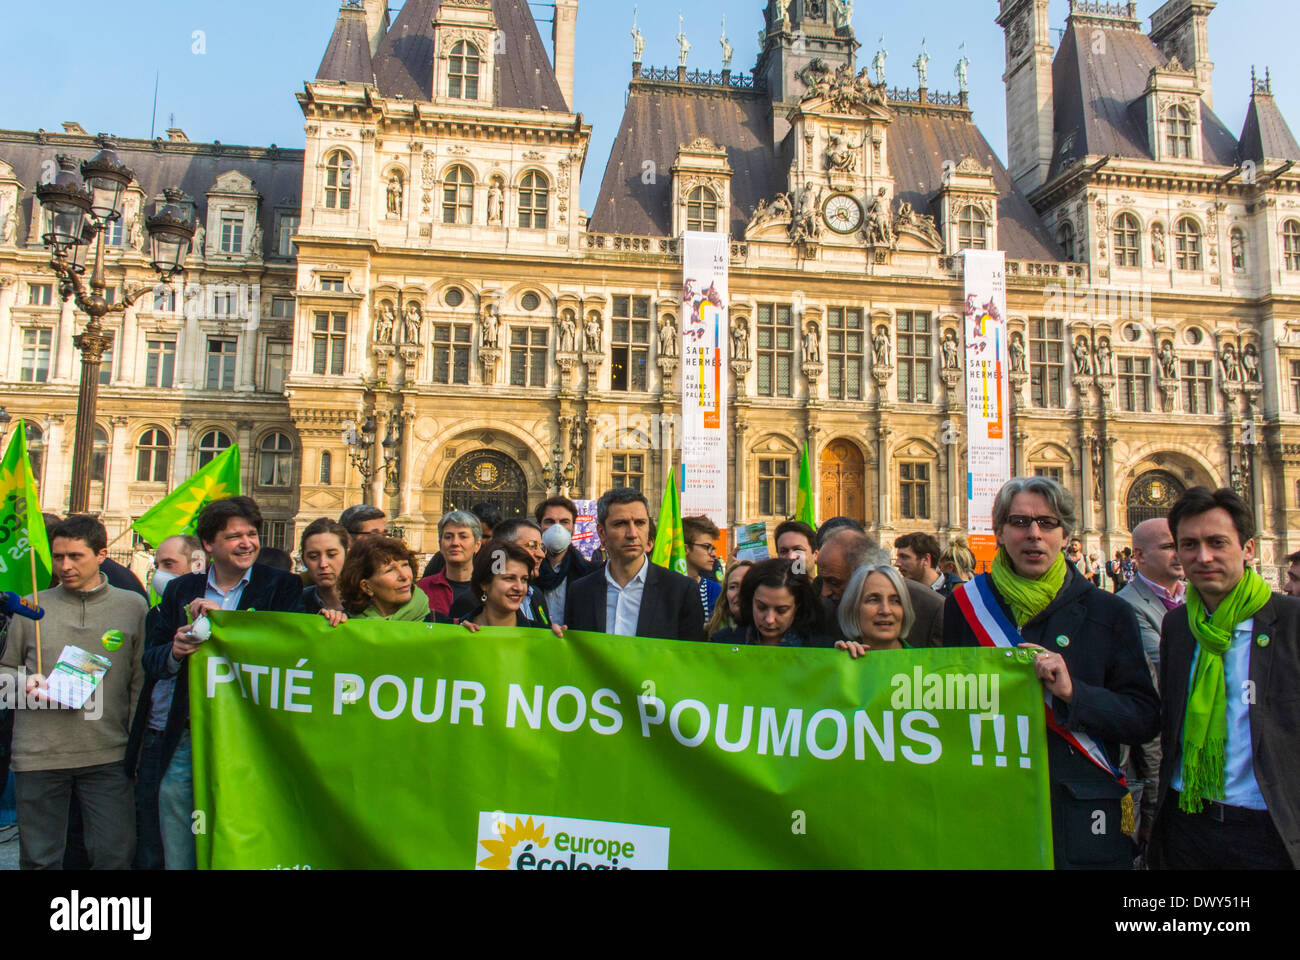 Paris, France. Crowd French People, Green Party protesting Air Pollution, Demand Alternative Lic-ense Plate Dri-ving Plan, Holding Protest Banners, hotel de ville paris Stock Photo